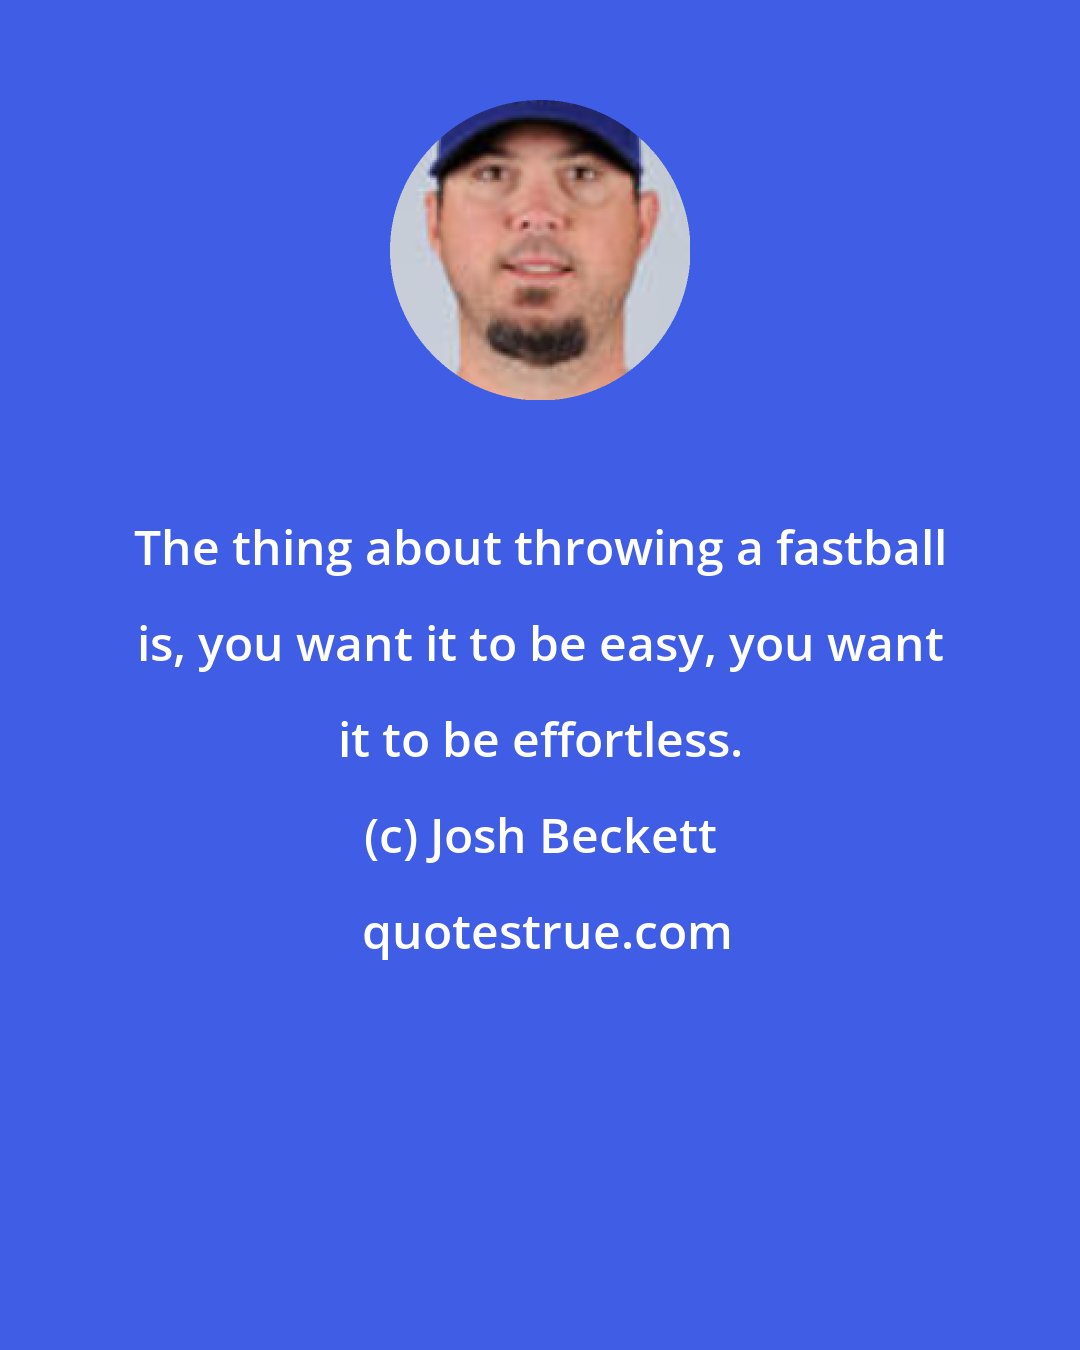 Josh Beckett: The thing about throwing a fastball is, you want it to be easy, you want it to be effortless.